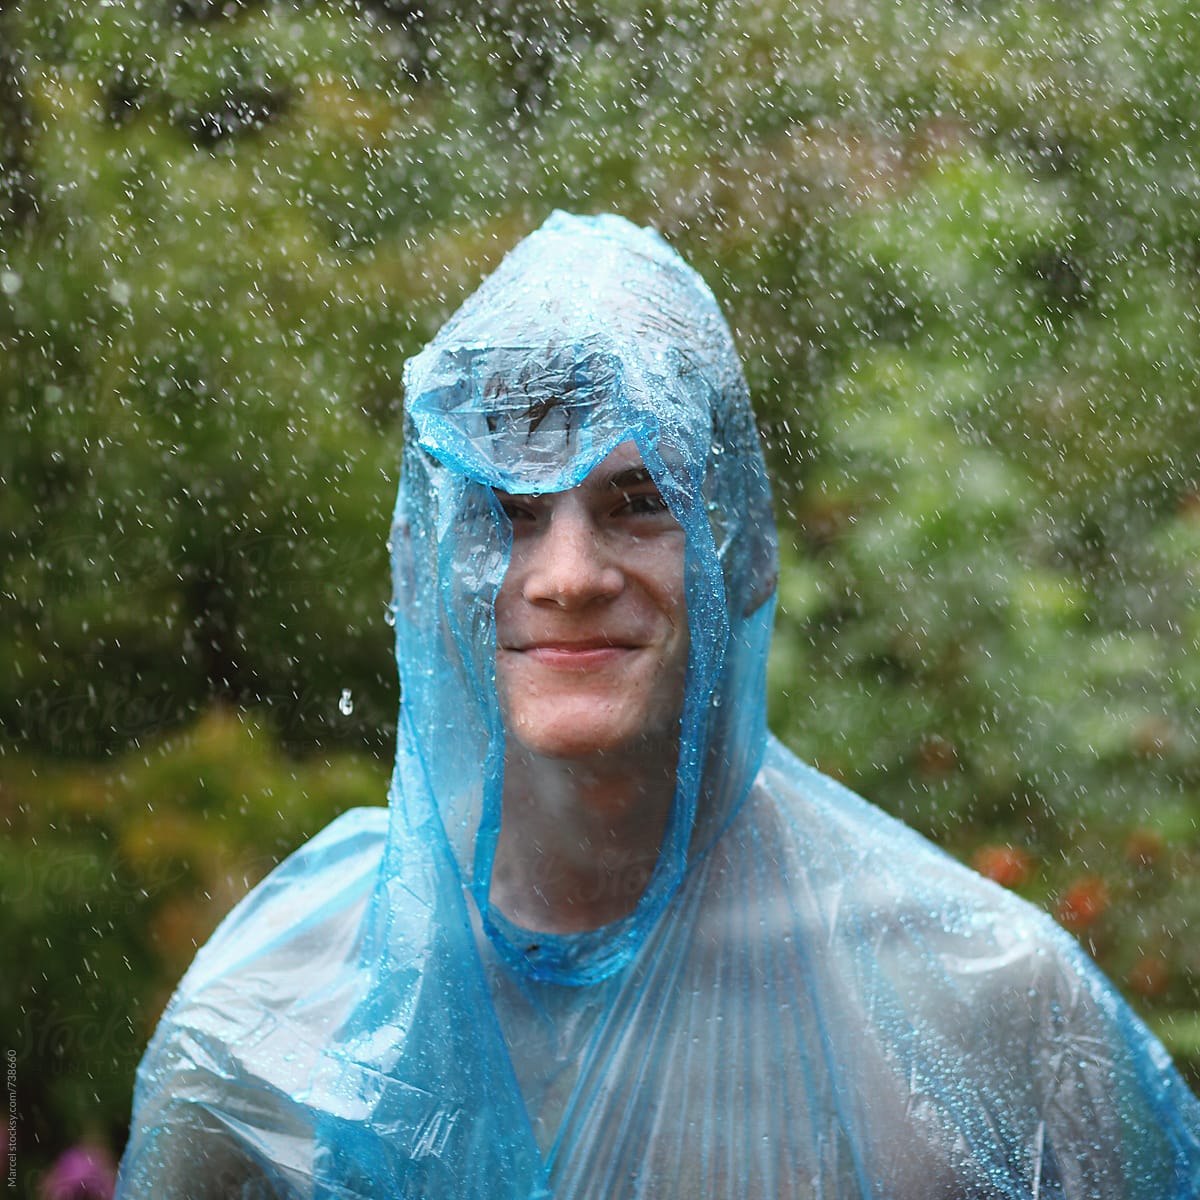 Young man at festival in pouring rain